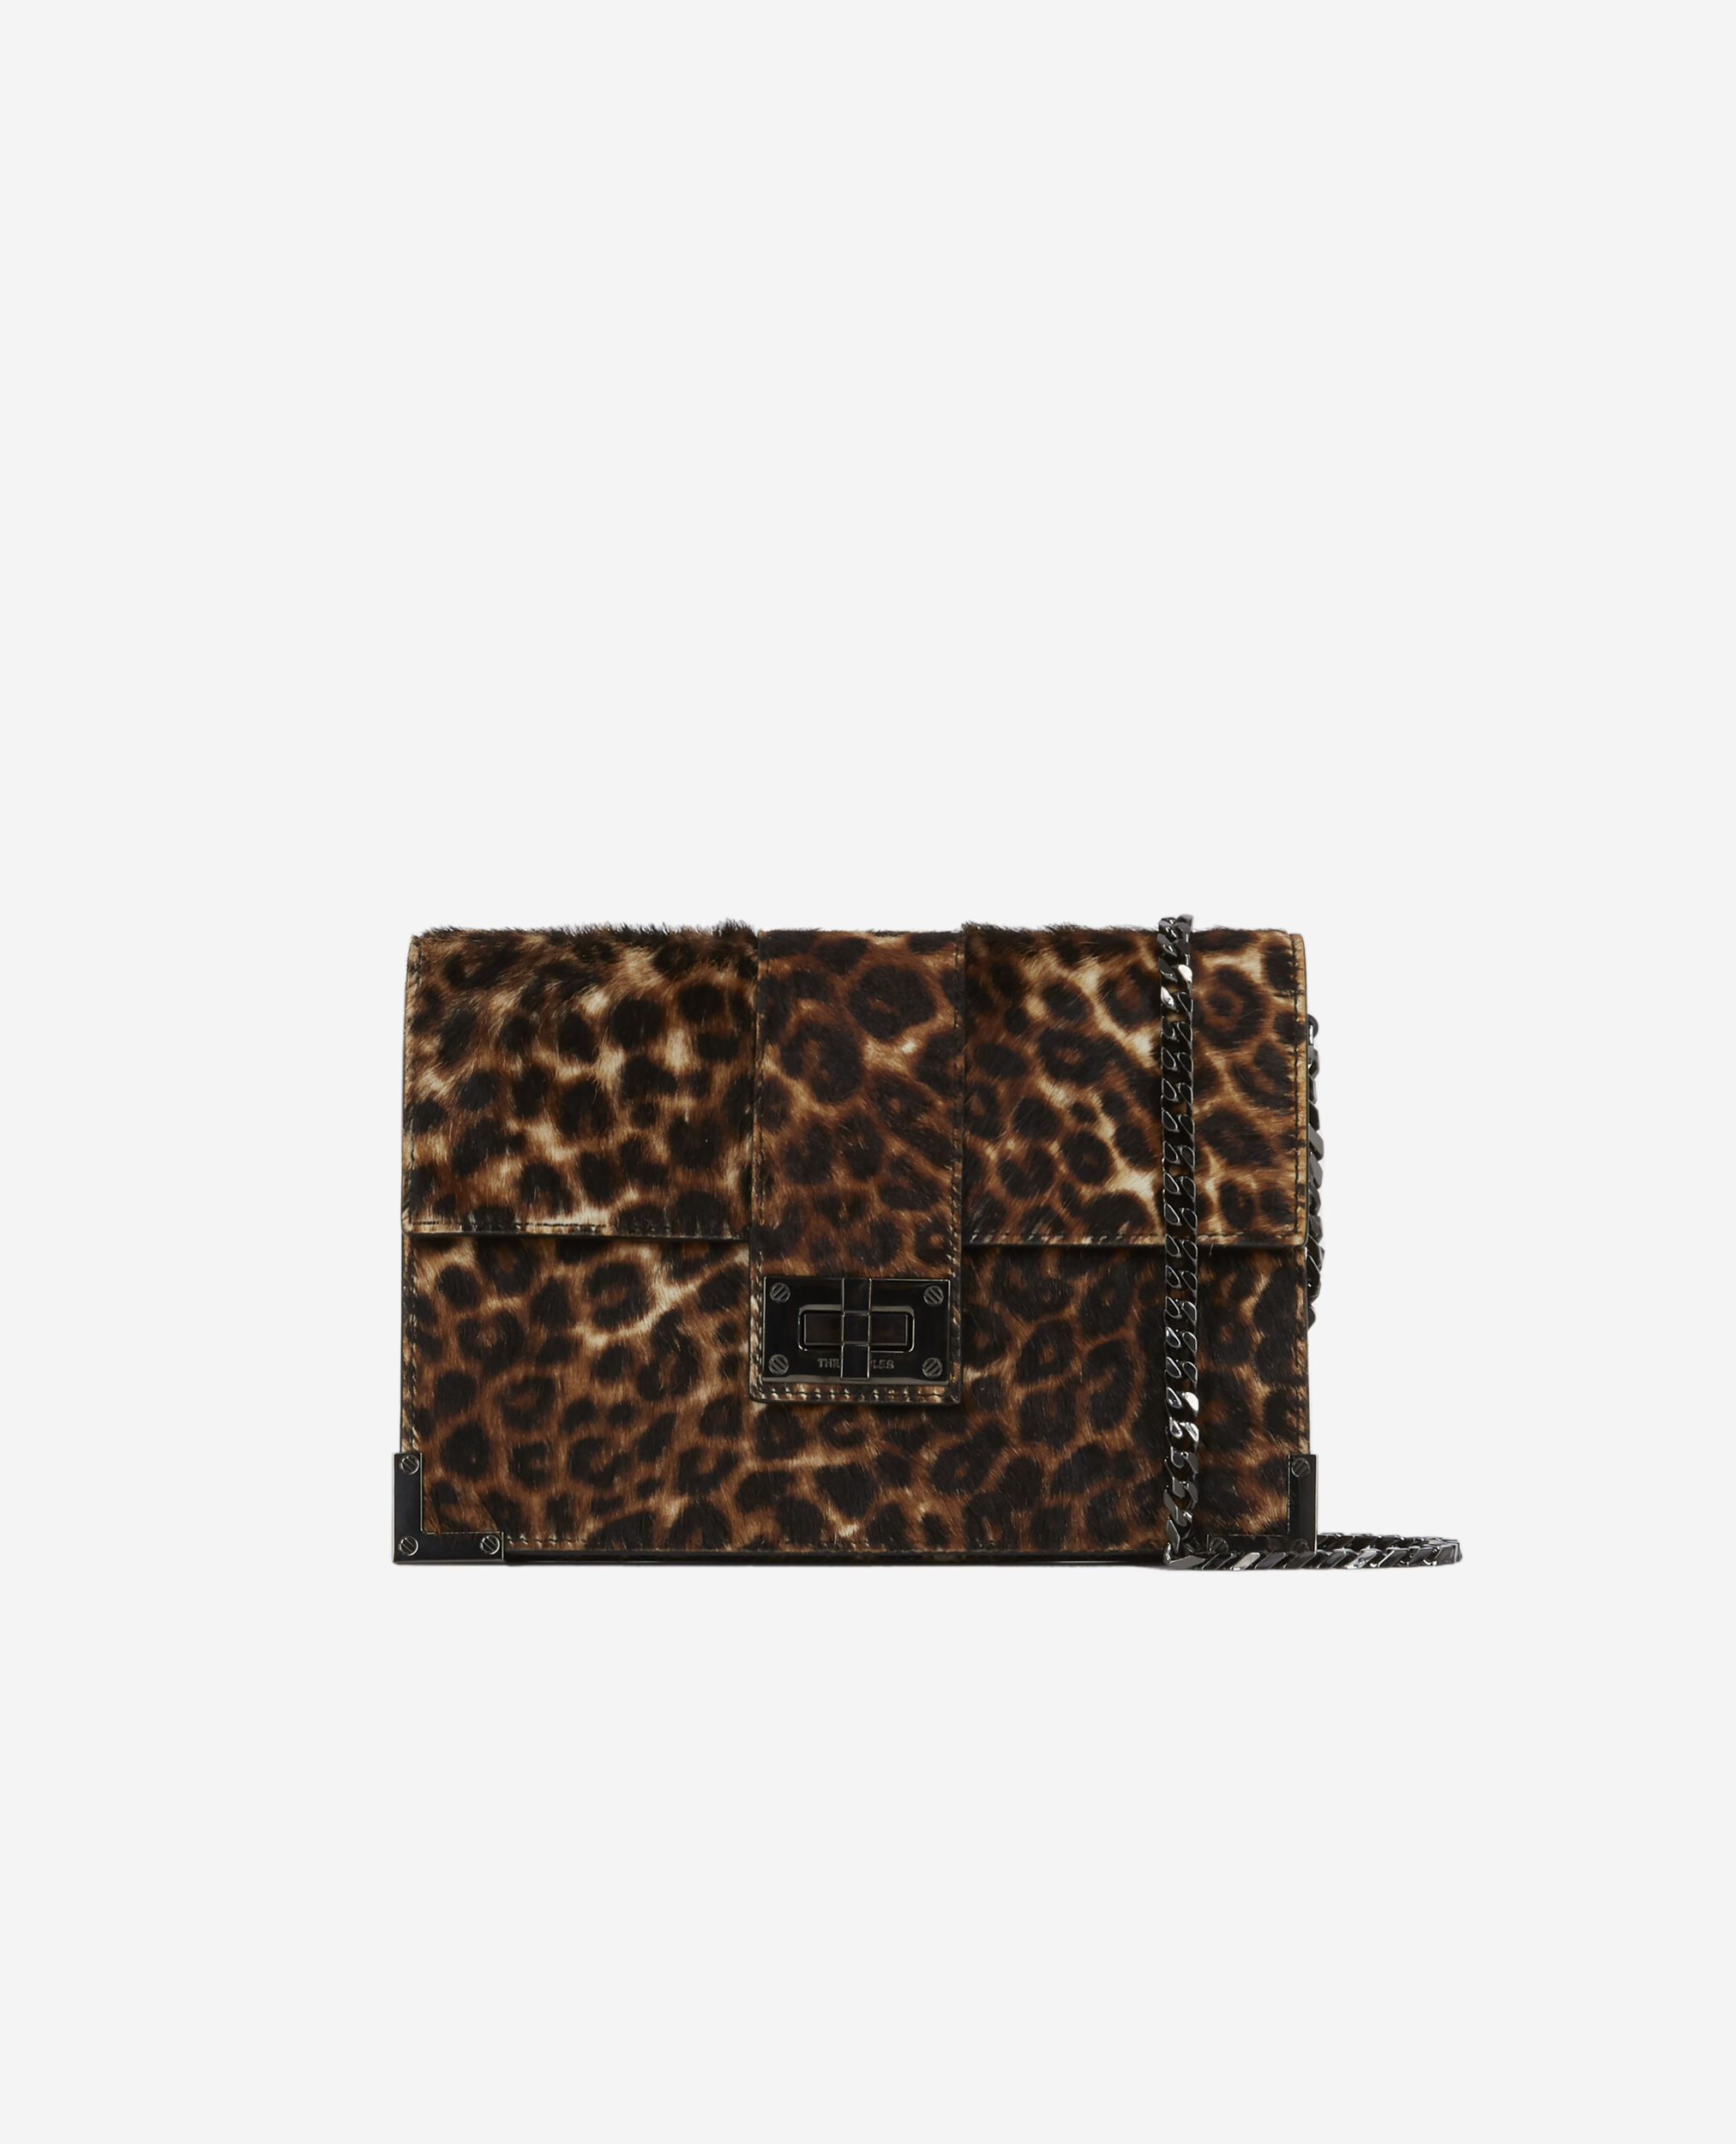 Medium Emily pouch in leopard print leather, LEOPARD, hi-res image number null